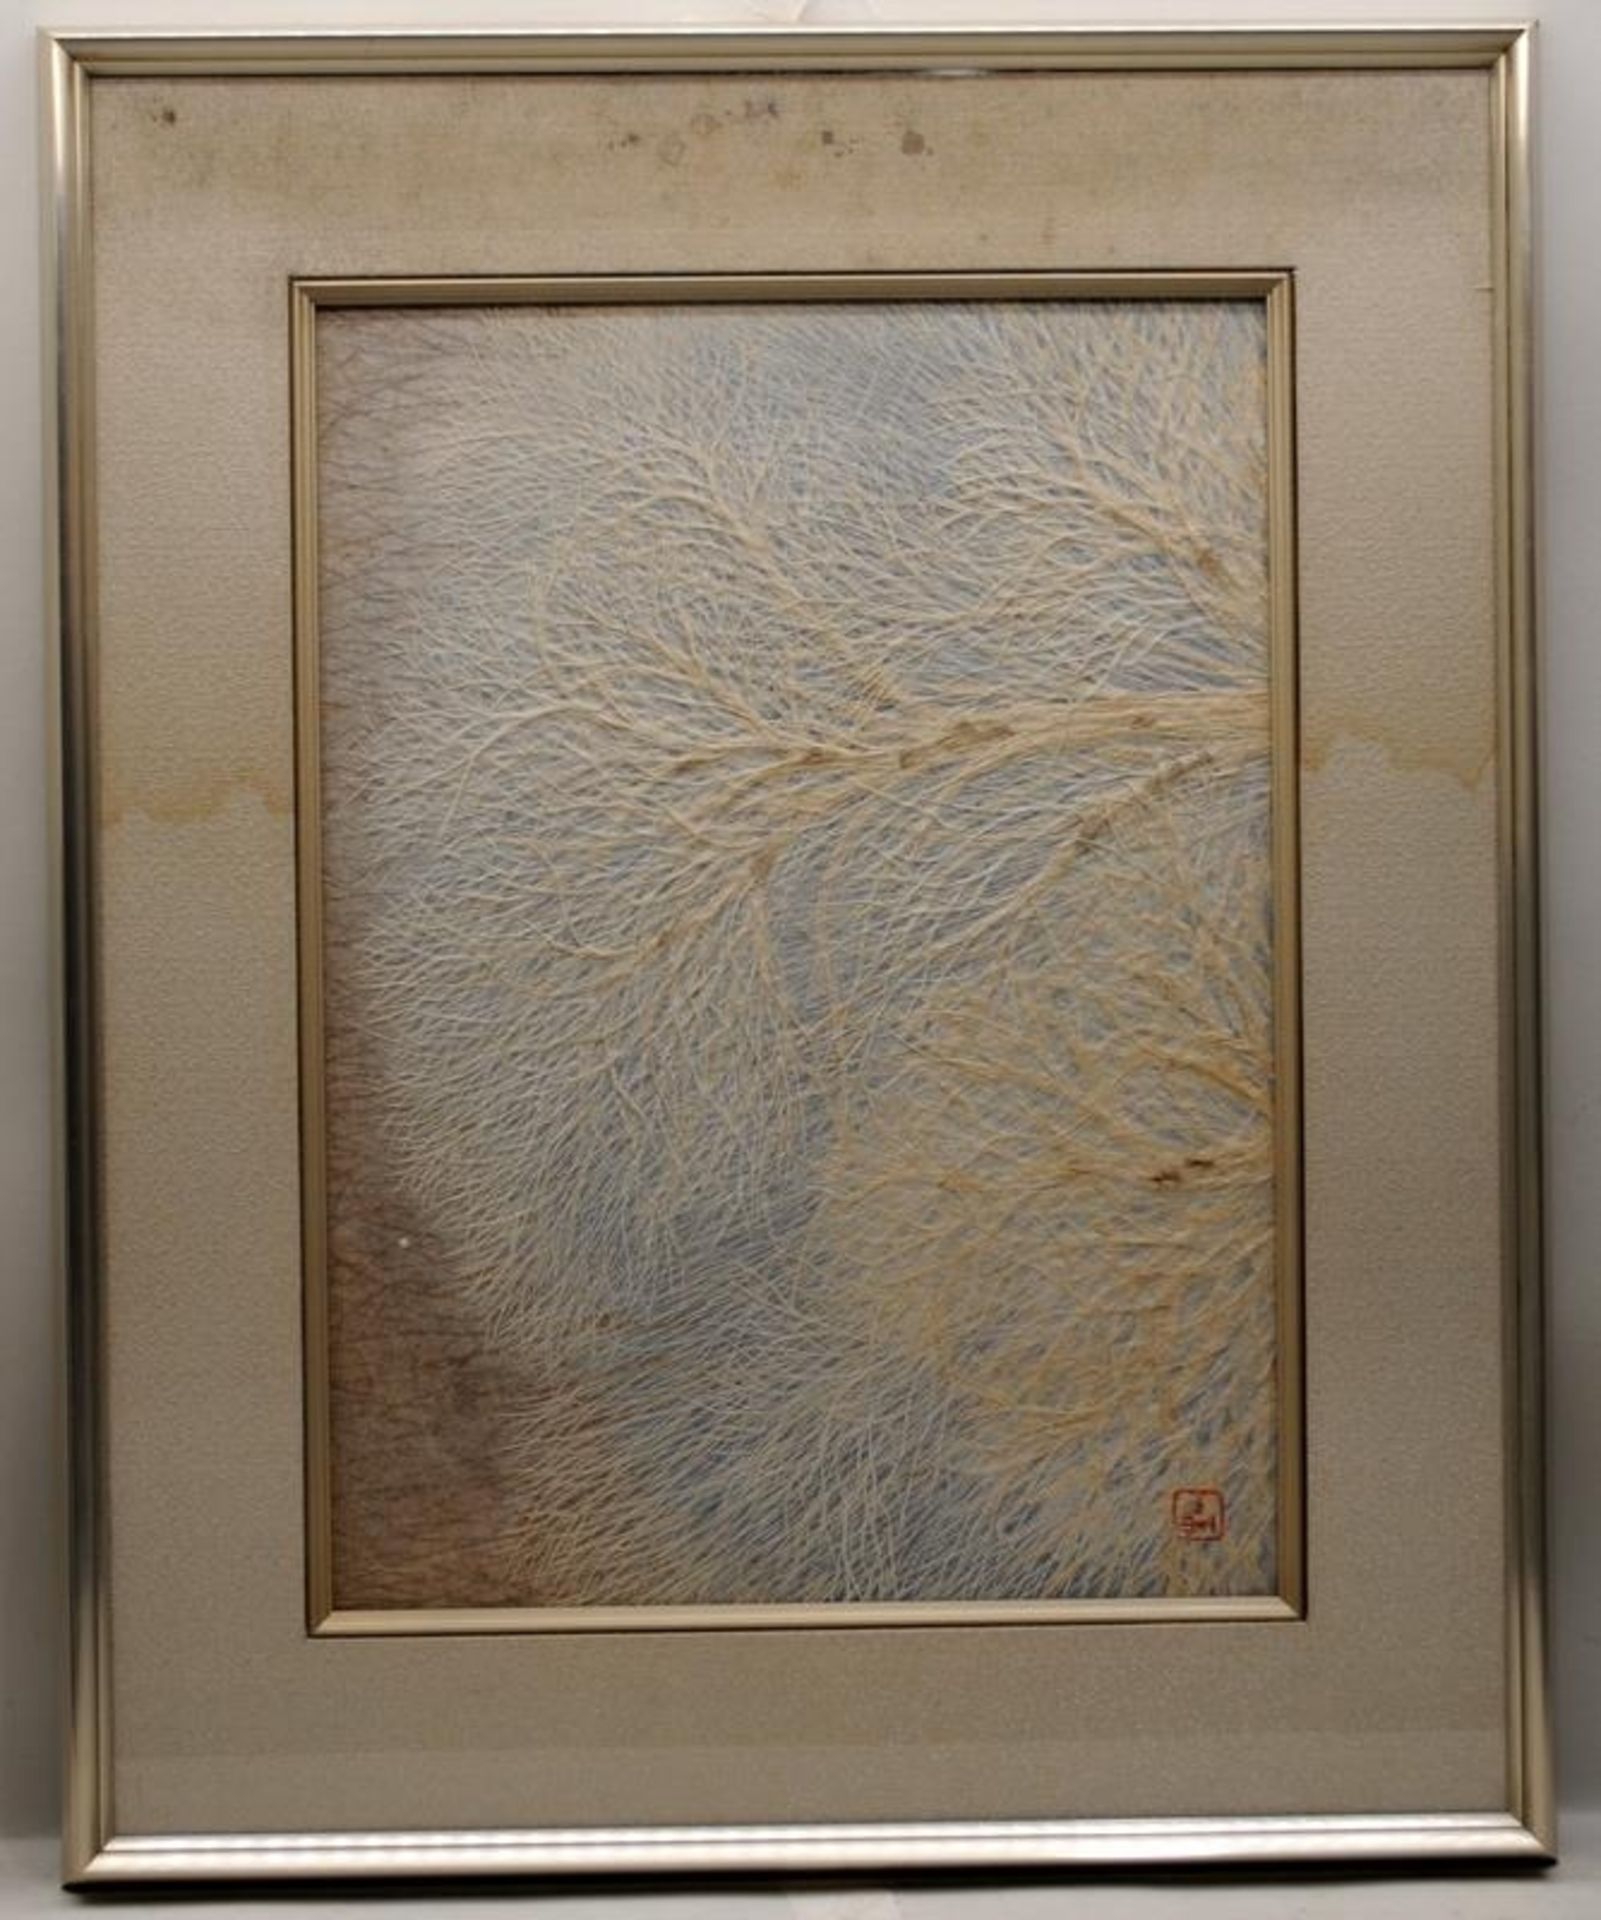 Japanese natural fibres framed artwork. Presented to Lord Stokes, Chairman of British Leyland by the